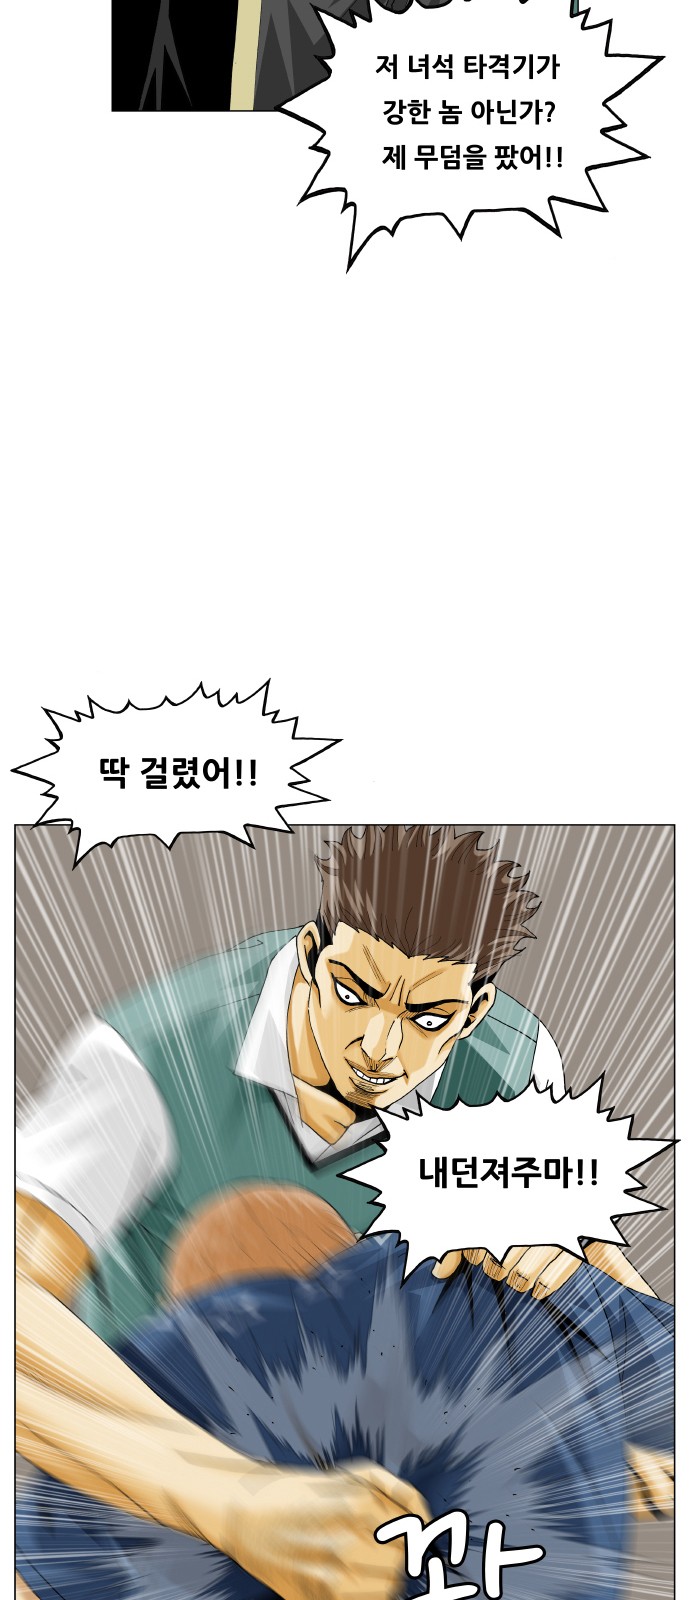 Ultimate Legend - Kang Hae Hyo - Chapter 461 - Page 3